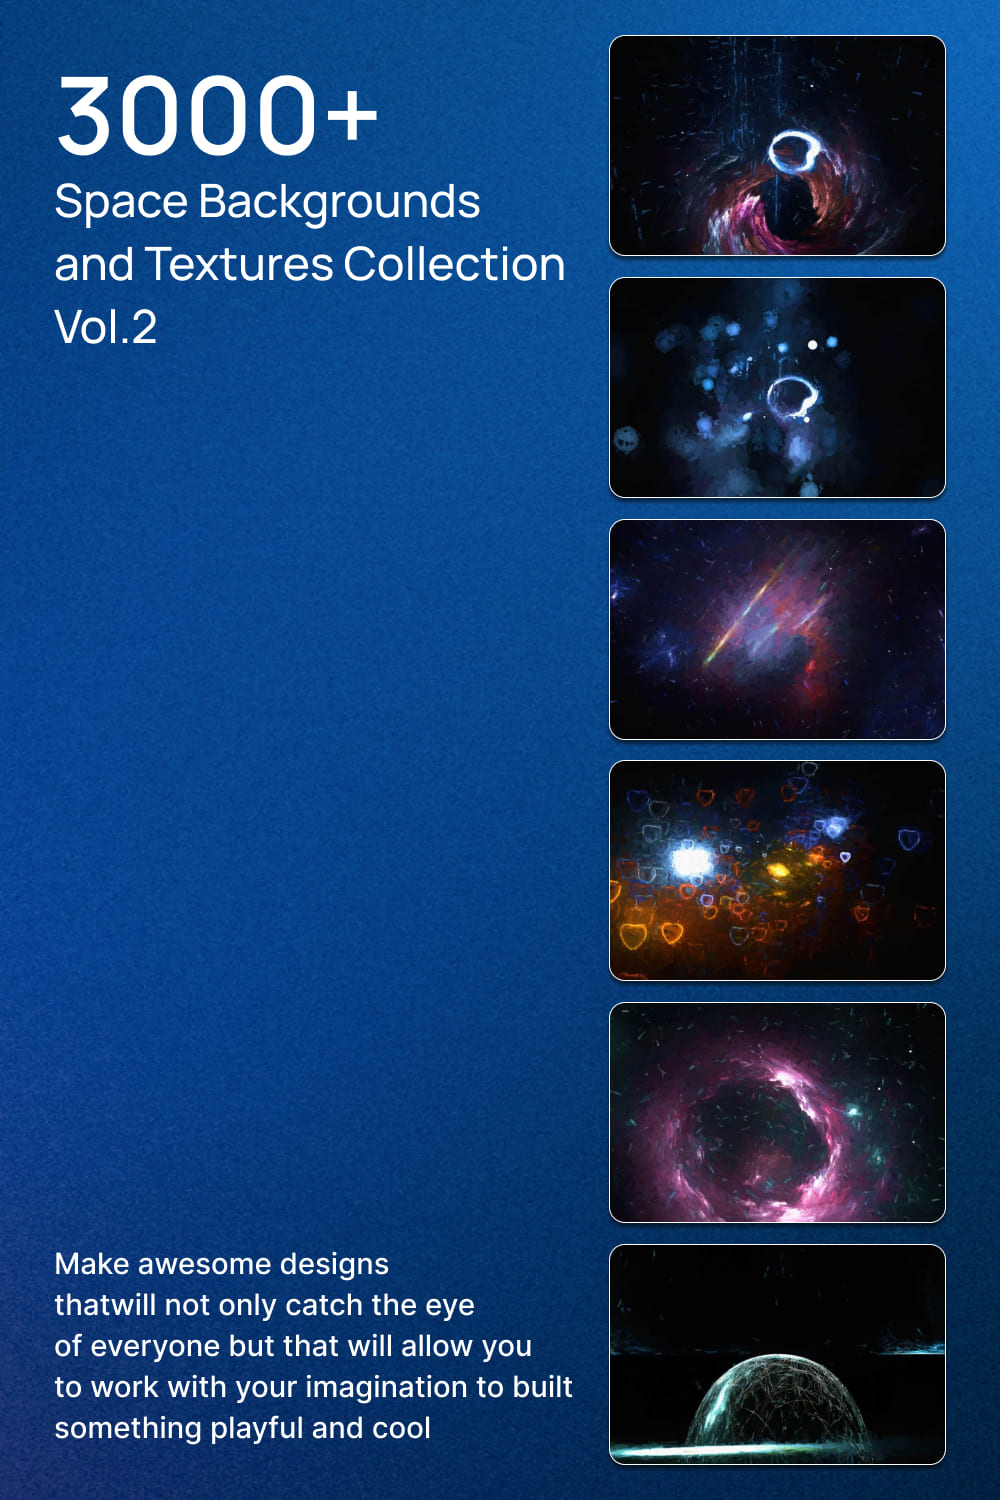 3000 space backgrounds and textures collection – vol.2 03